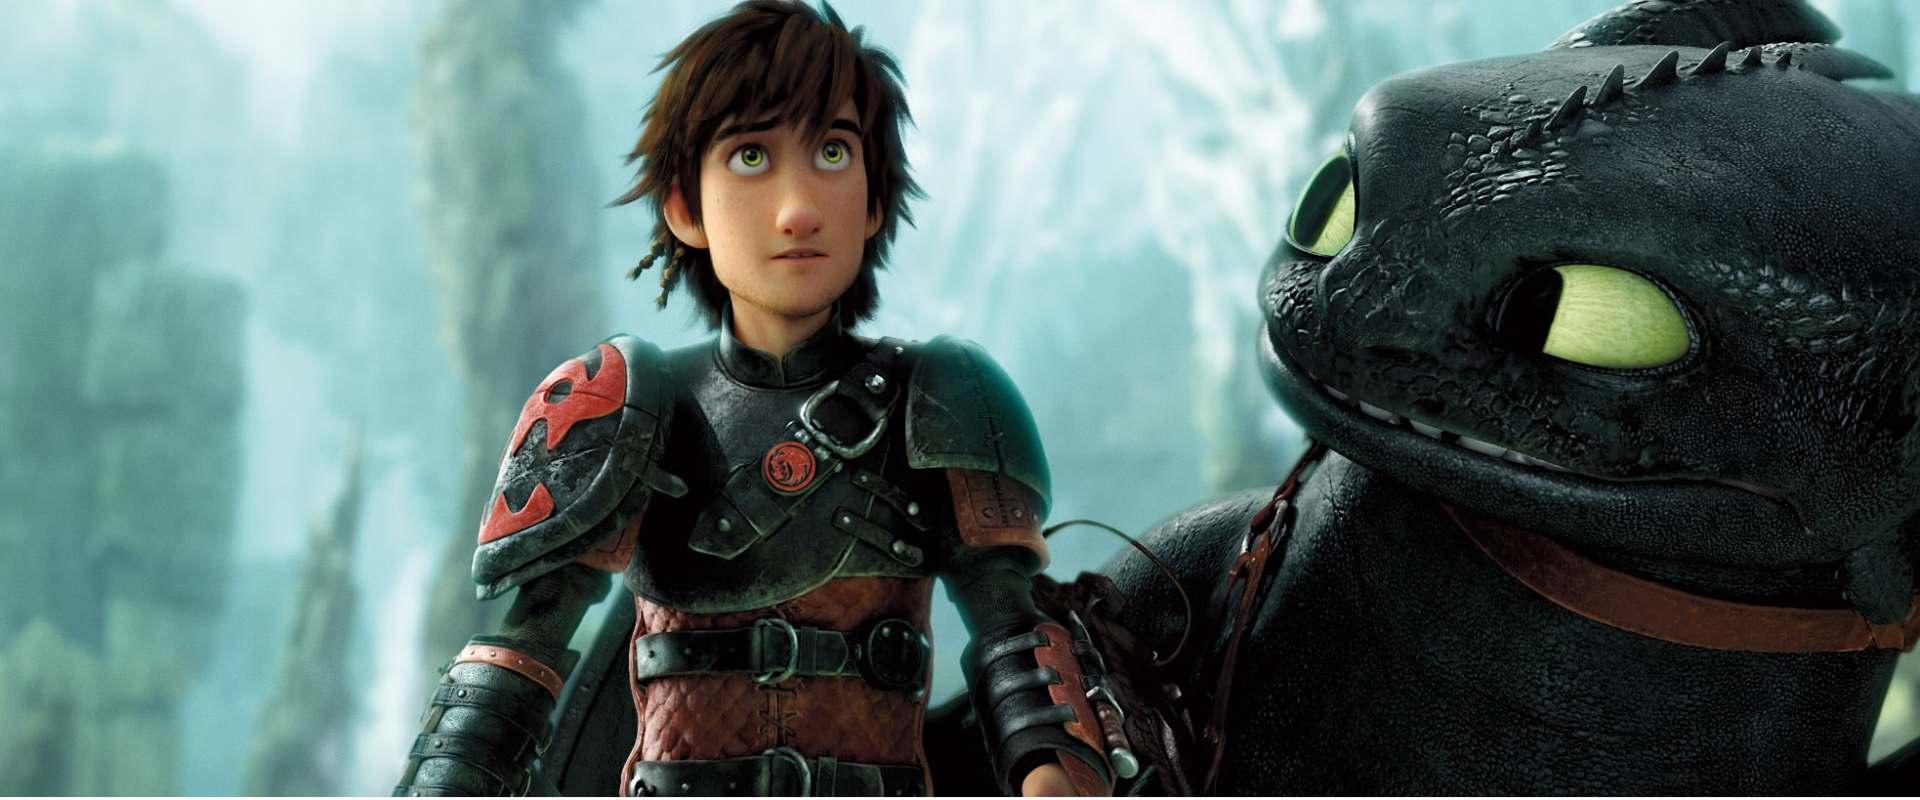 How to Train Your Dragon 2 background 1